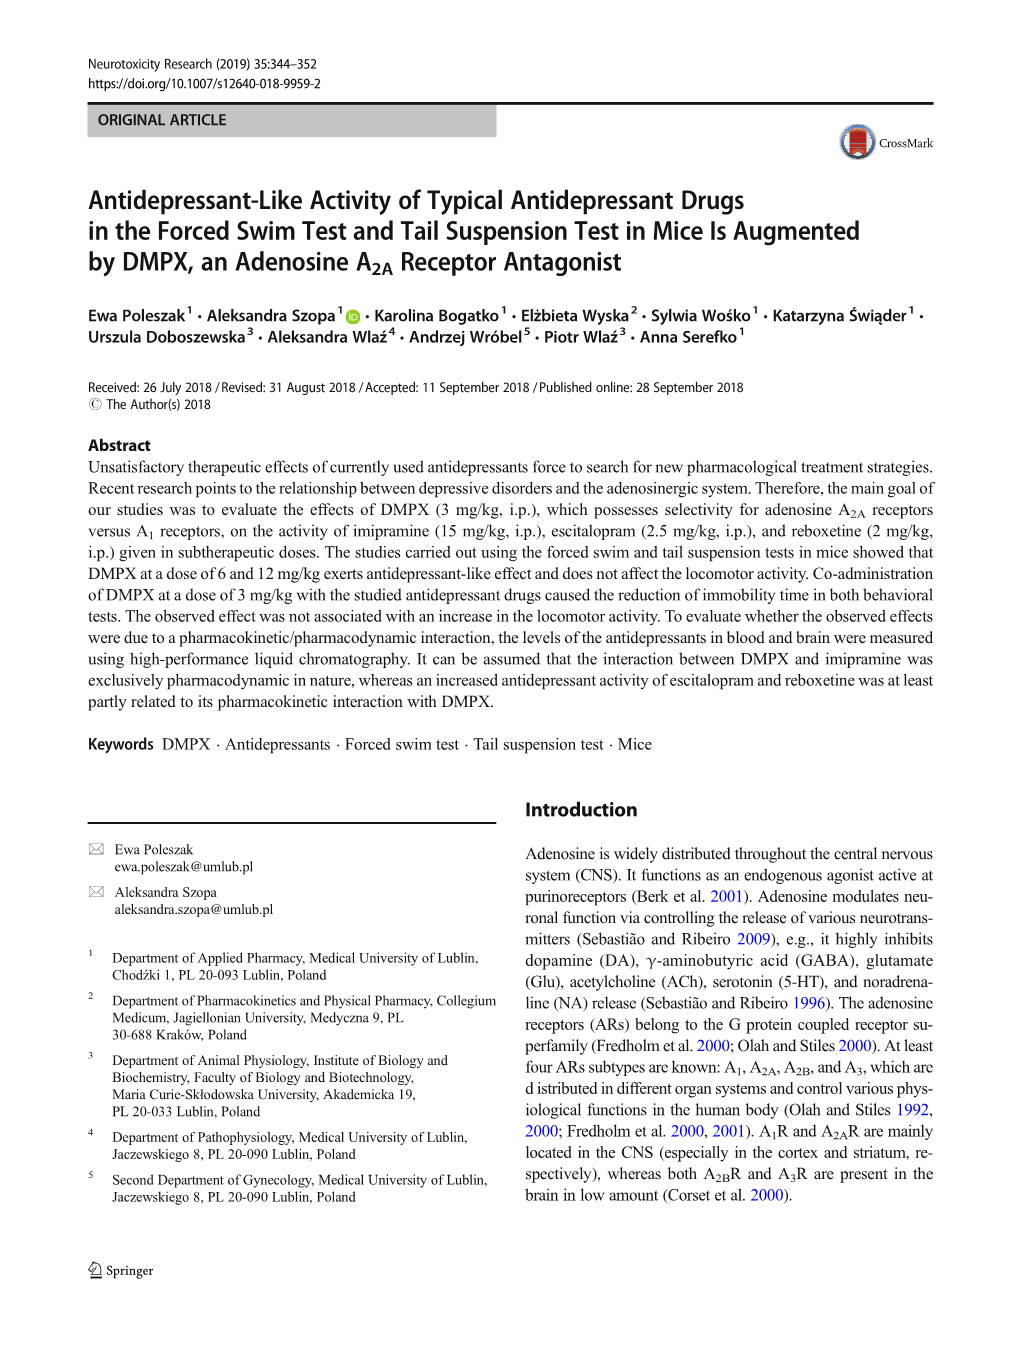 Antidepressant-Like Activity of Typical Antidepressant Drugs in the Forced